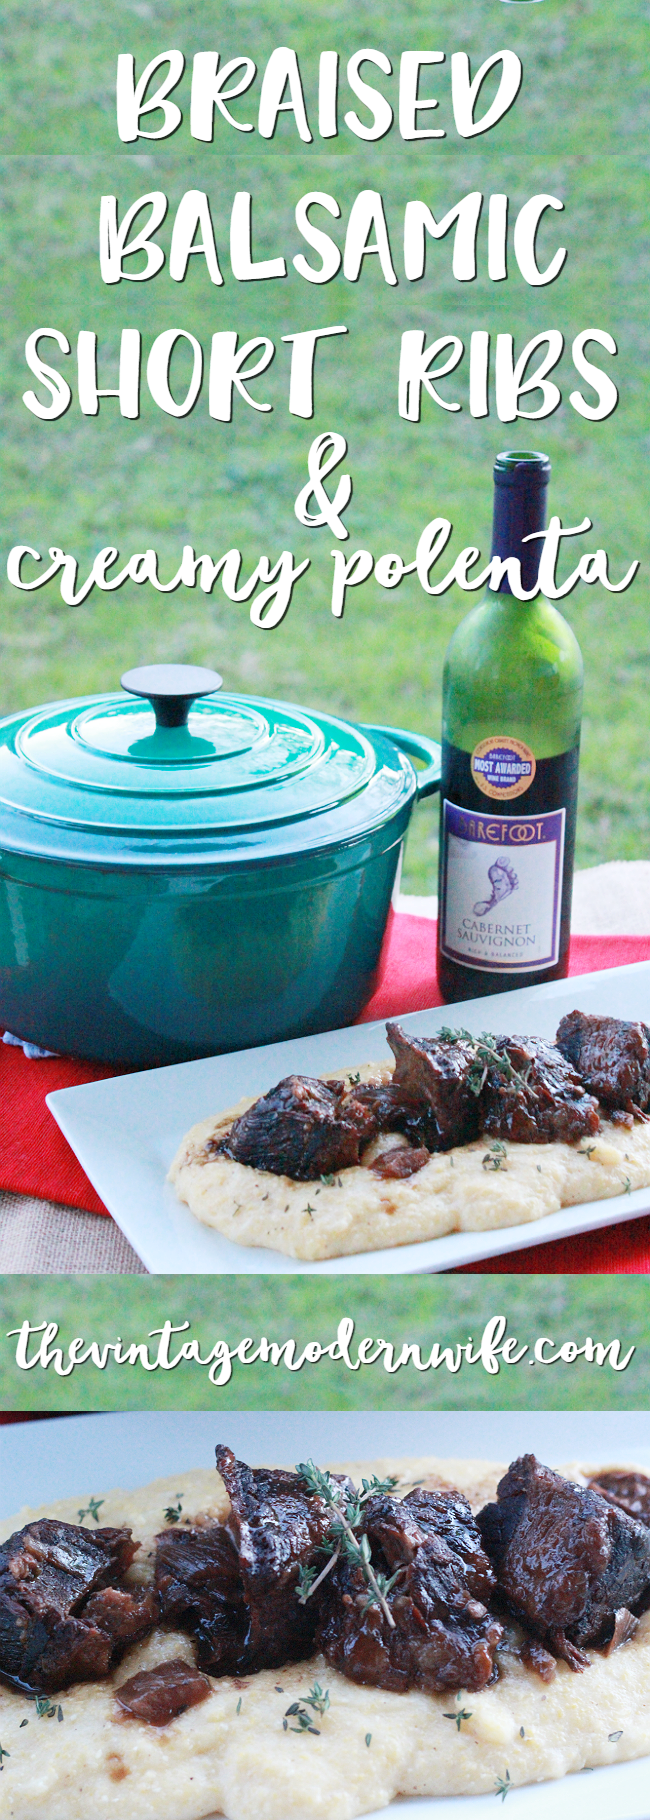 Looking for a stick-to-your-ribs winter dinner recipe? These Braised Balsamic Short Ribs and Creamy Polenta are SO good, you'll want to make it over and over again! So grab your Cocinaware Dutch Oven, and get cooking! 